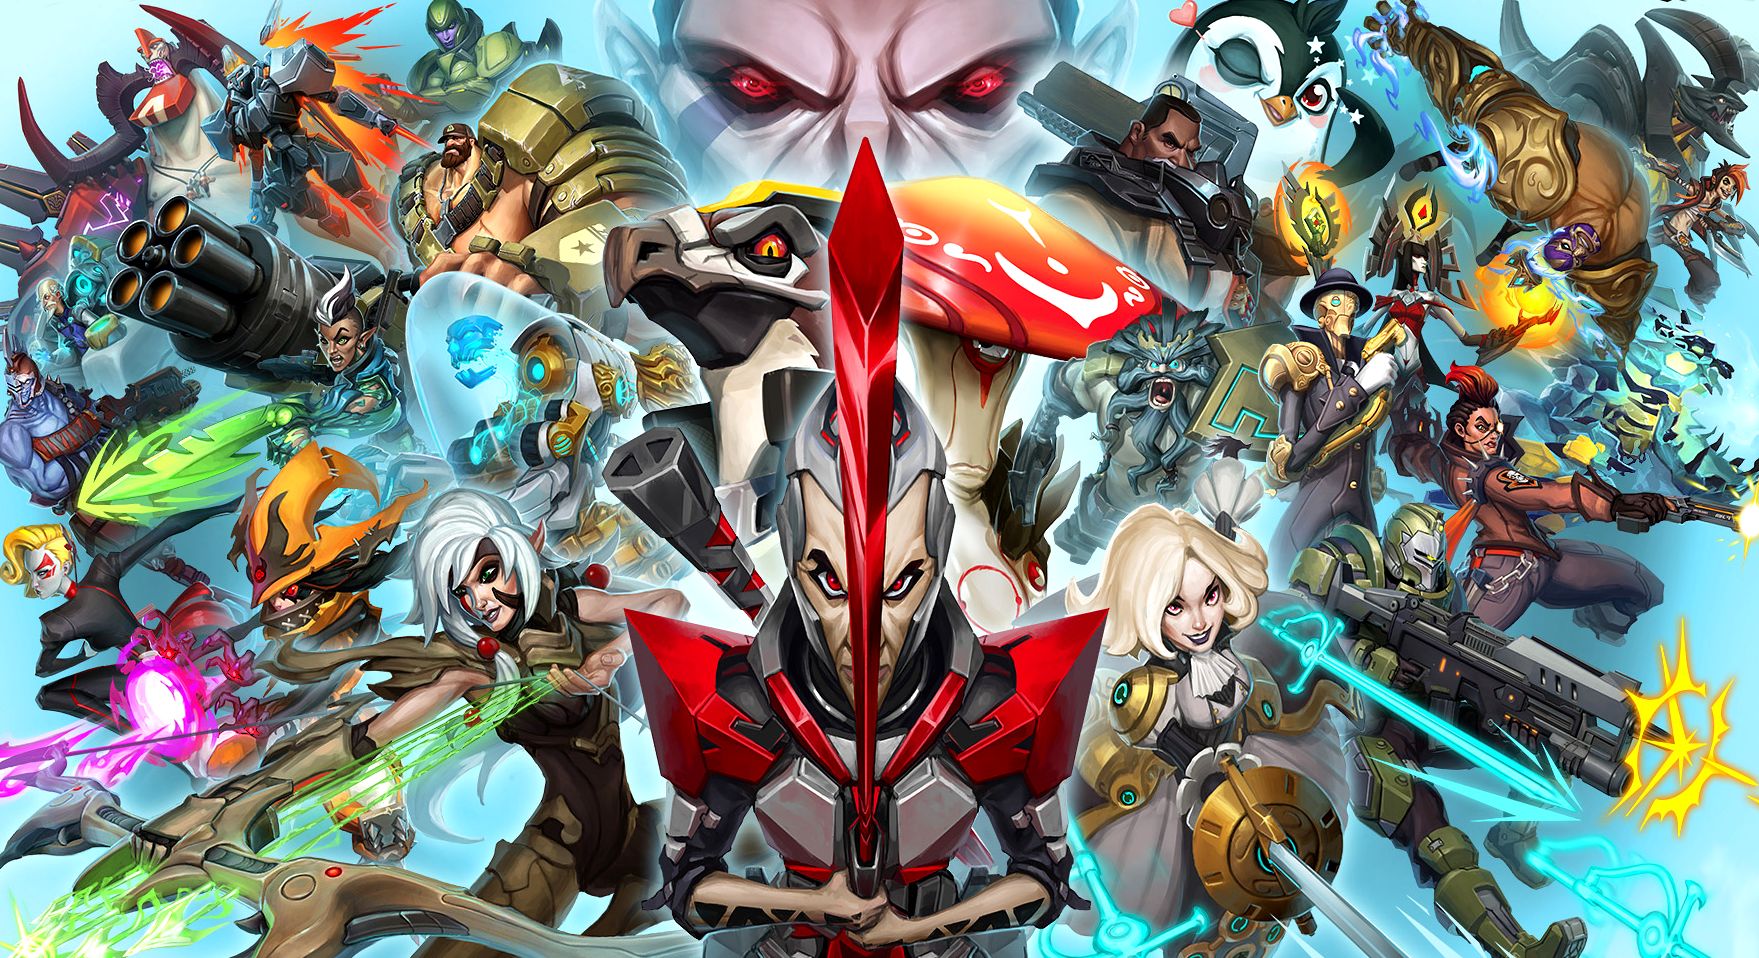 Image for Battleborn can be yours for £3.85 [Update: gone]